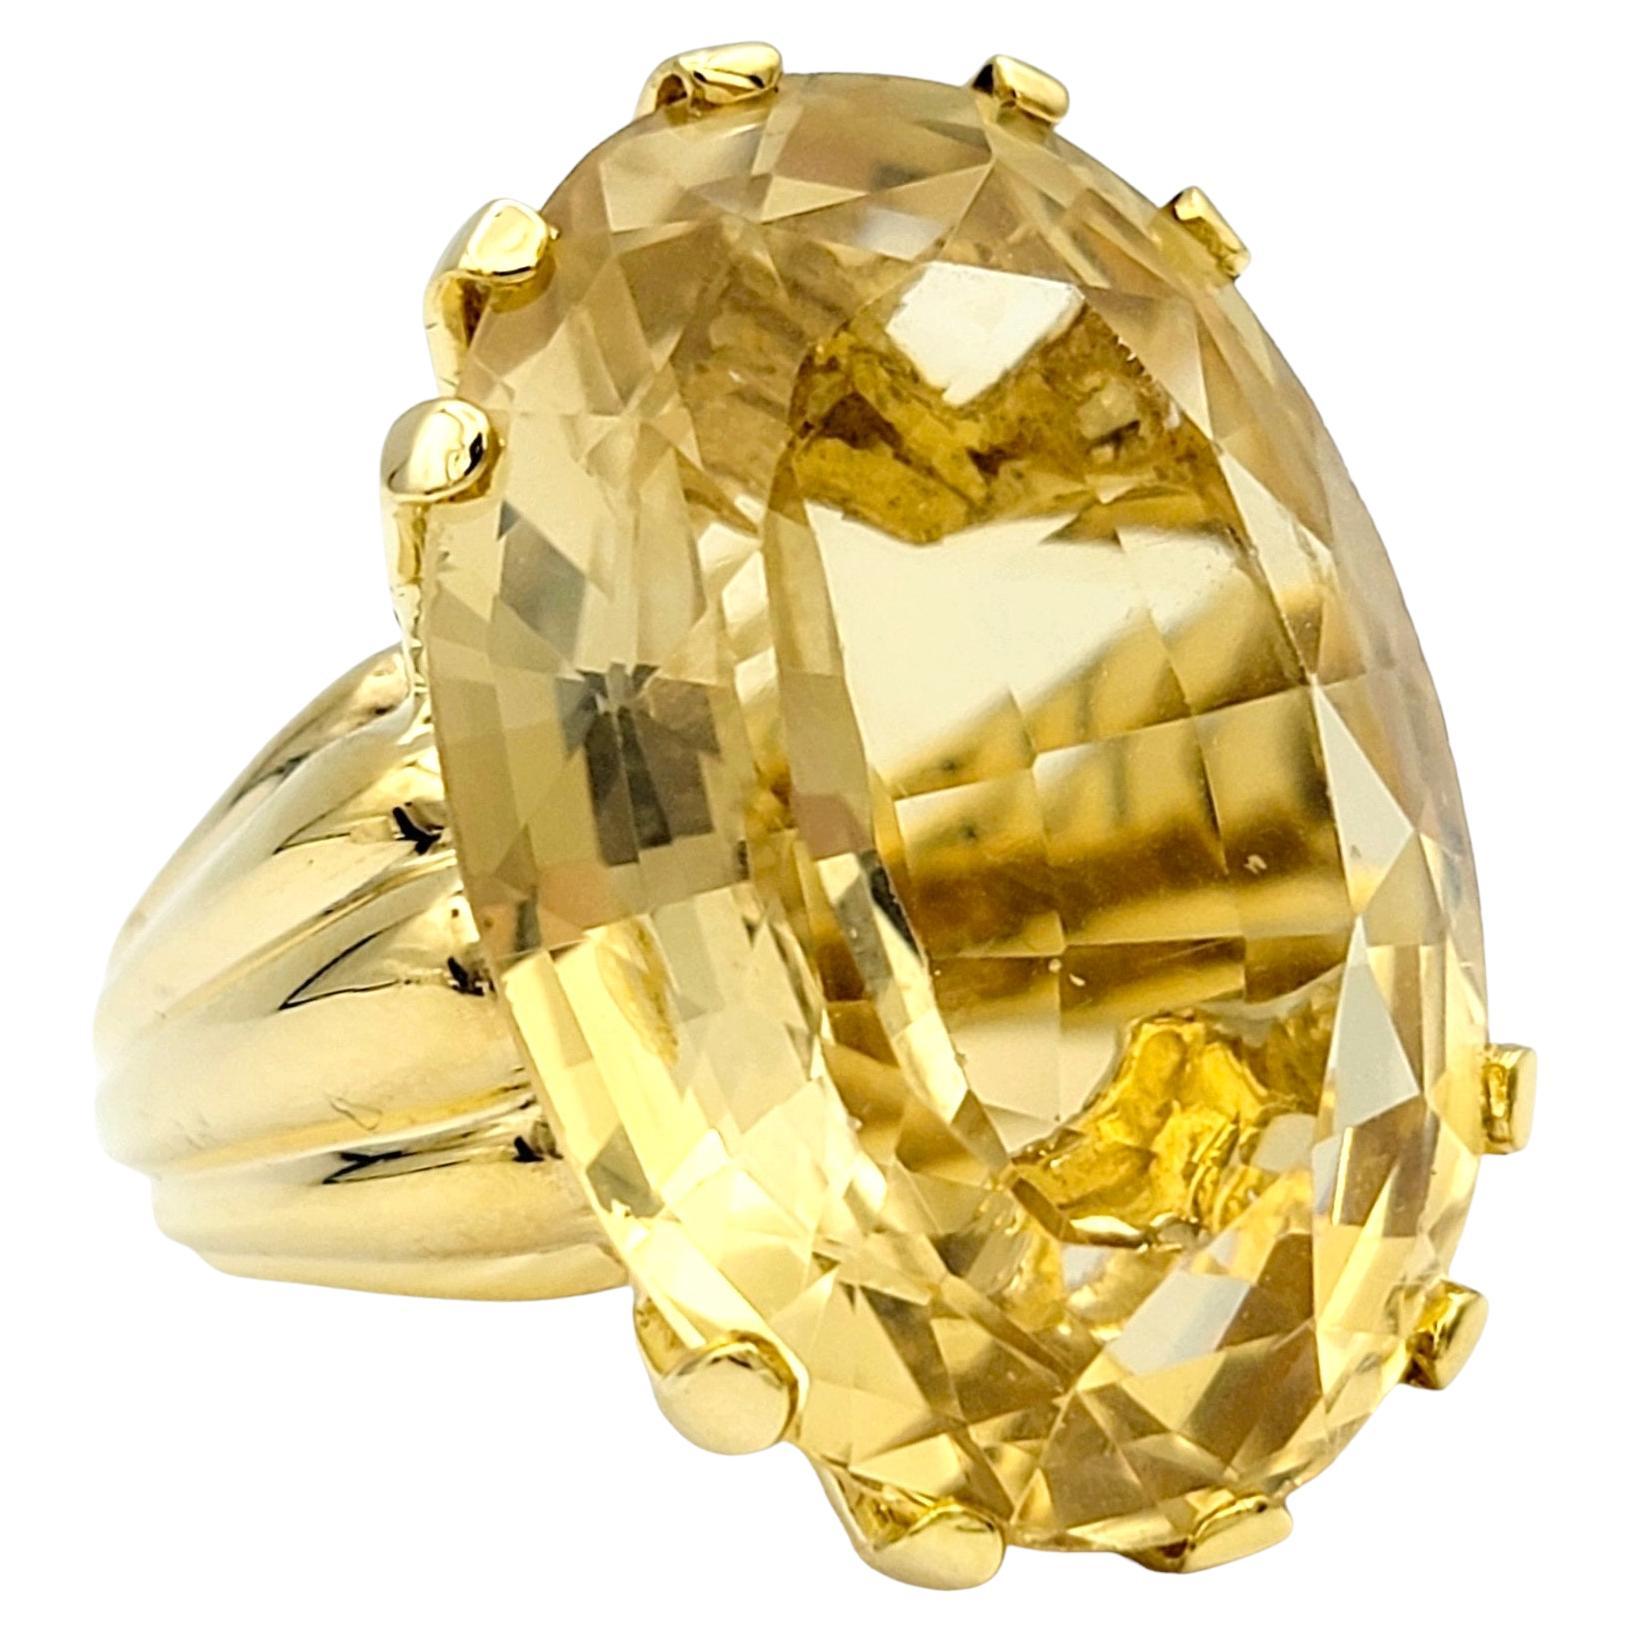 Huge 29.25 Carat Oval Citrine Solitaire Cocktail Ring in 14 Karat Yellow Gold